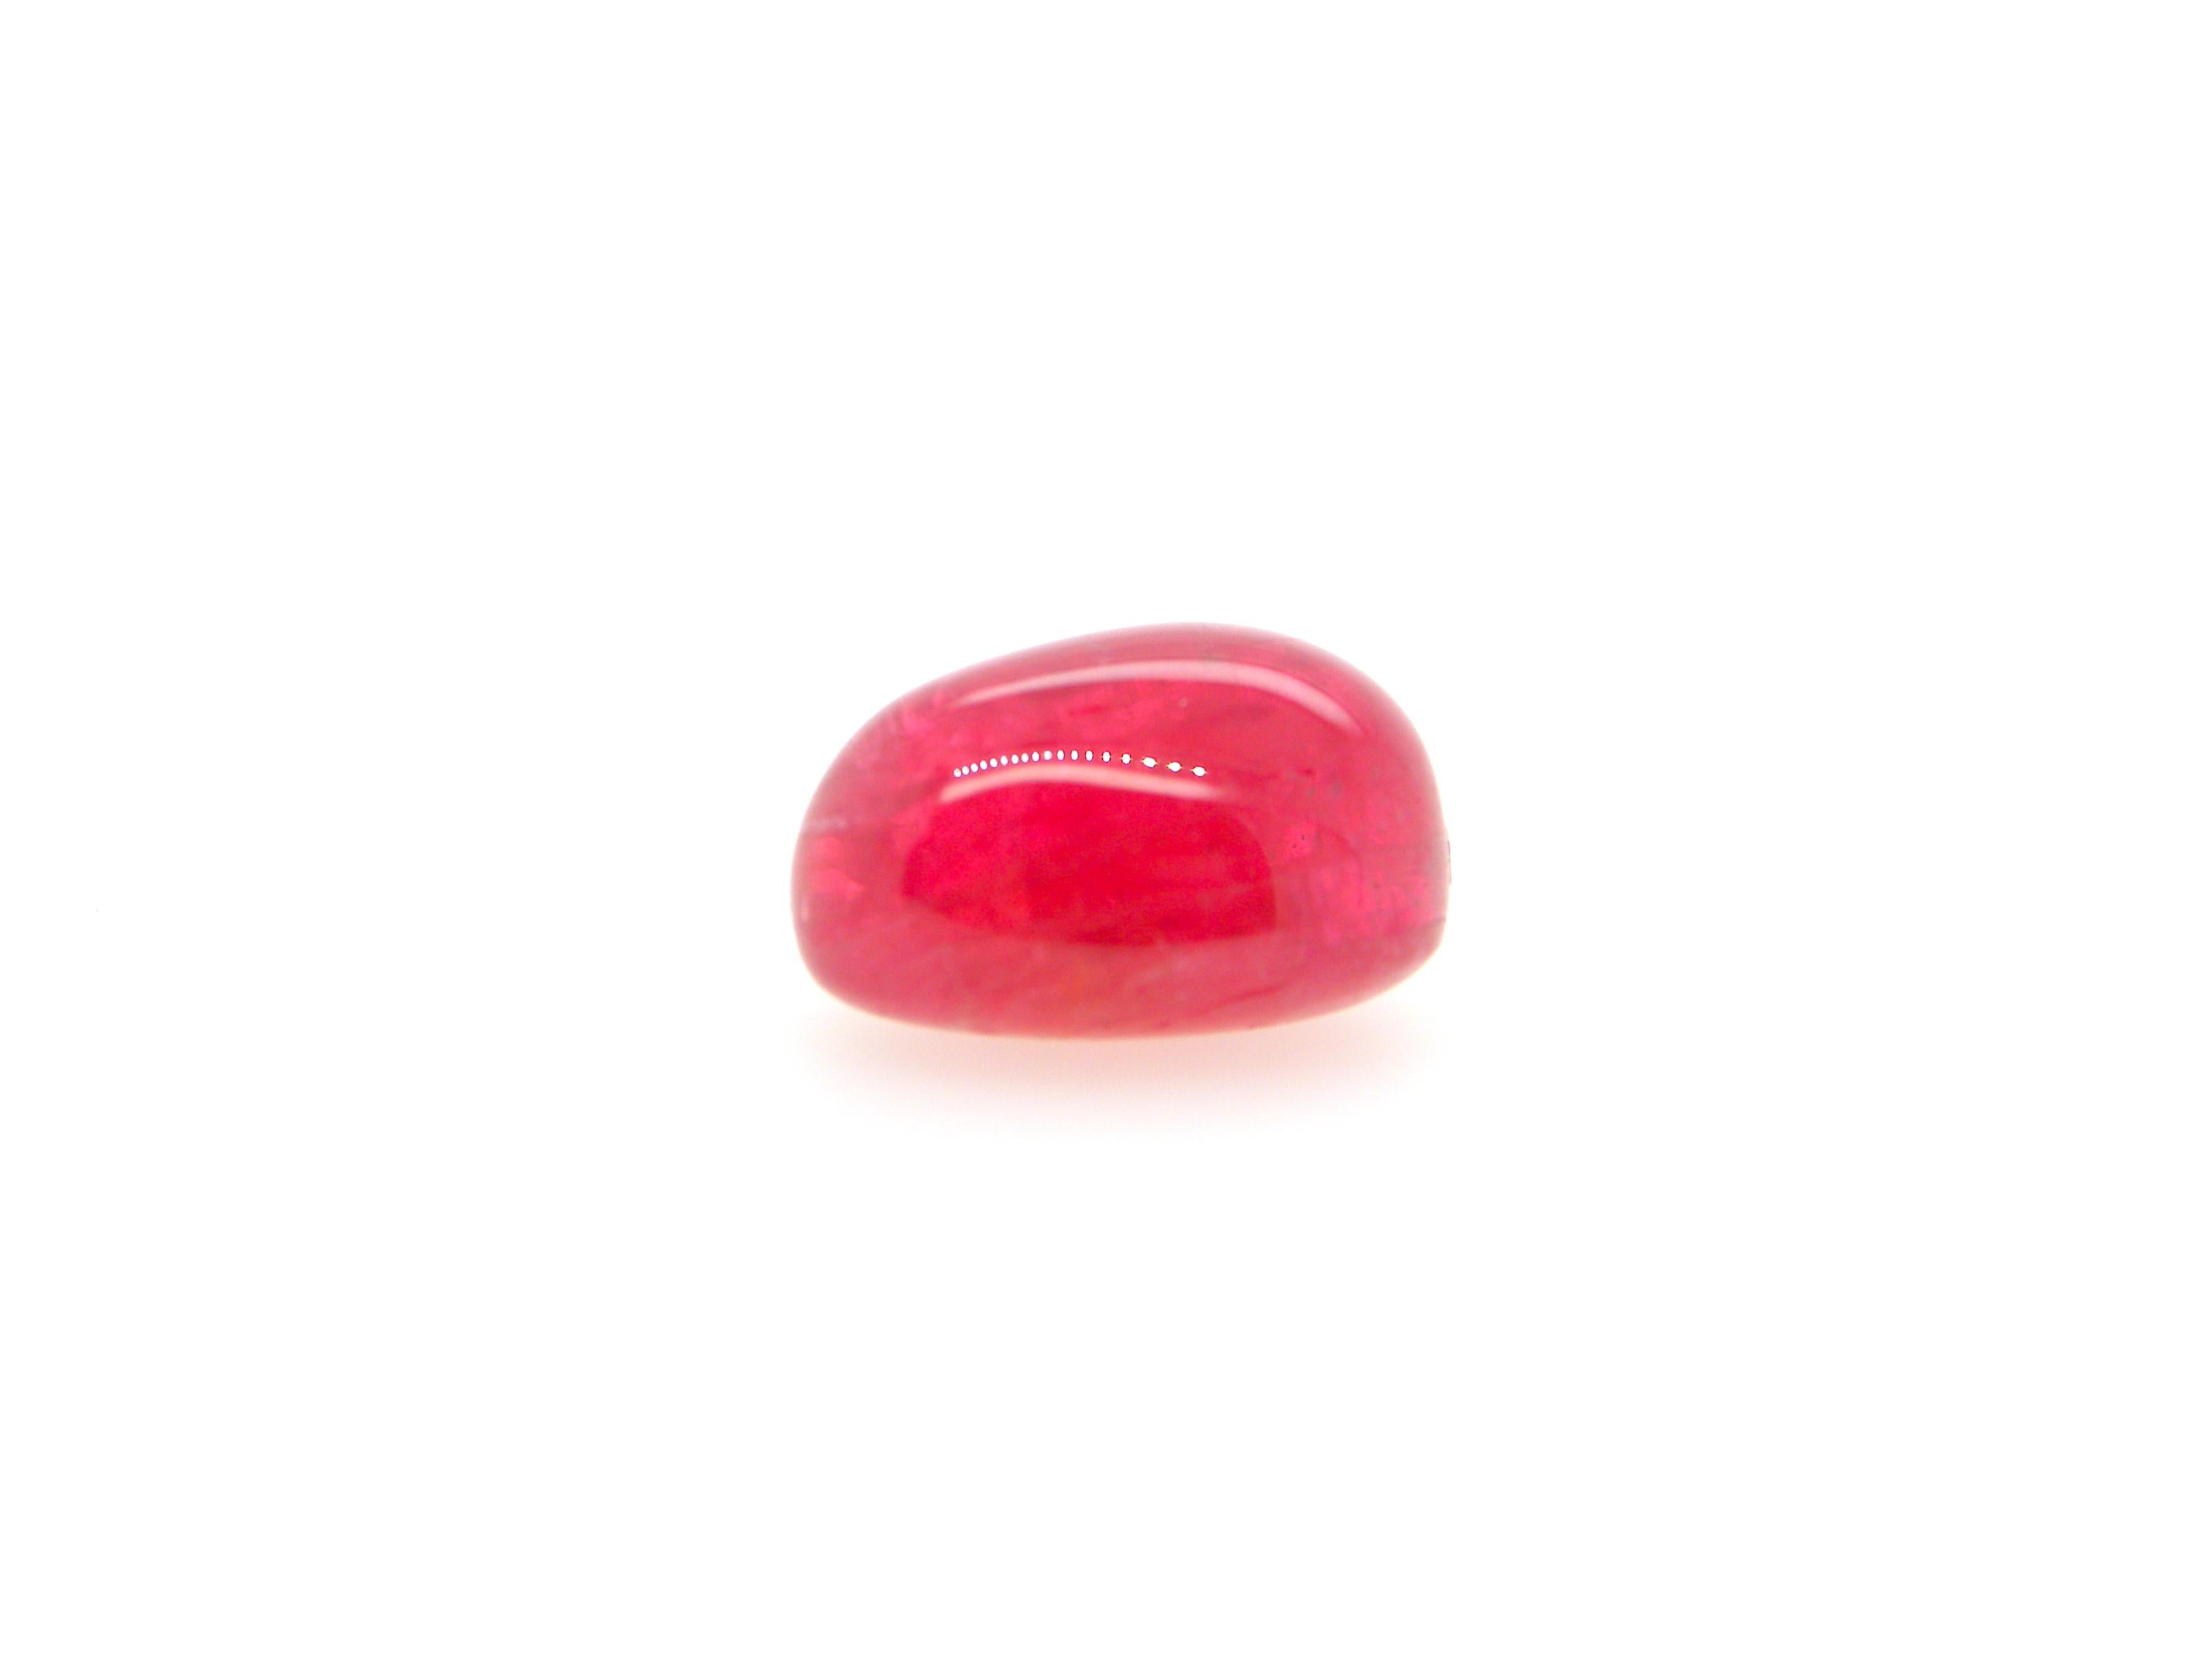 12 Carat Burma No Heat Red Spinel Cabochon For Sale 1